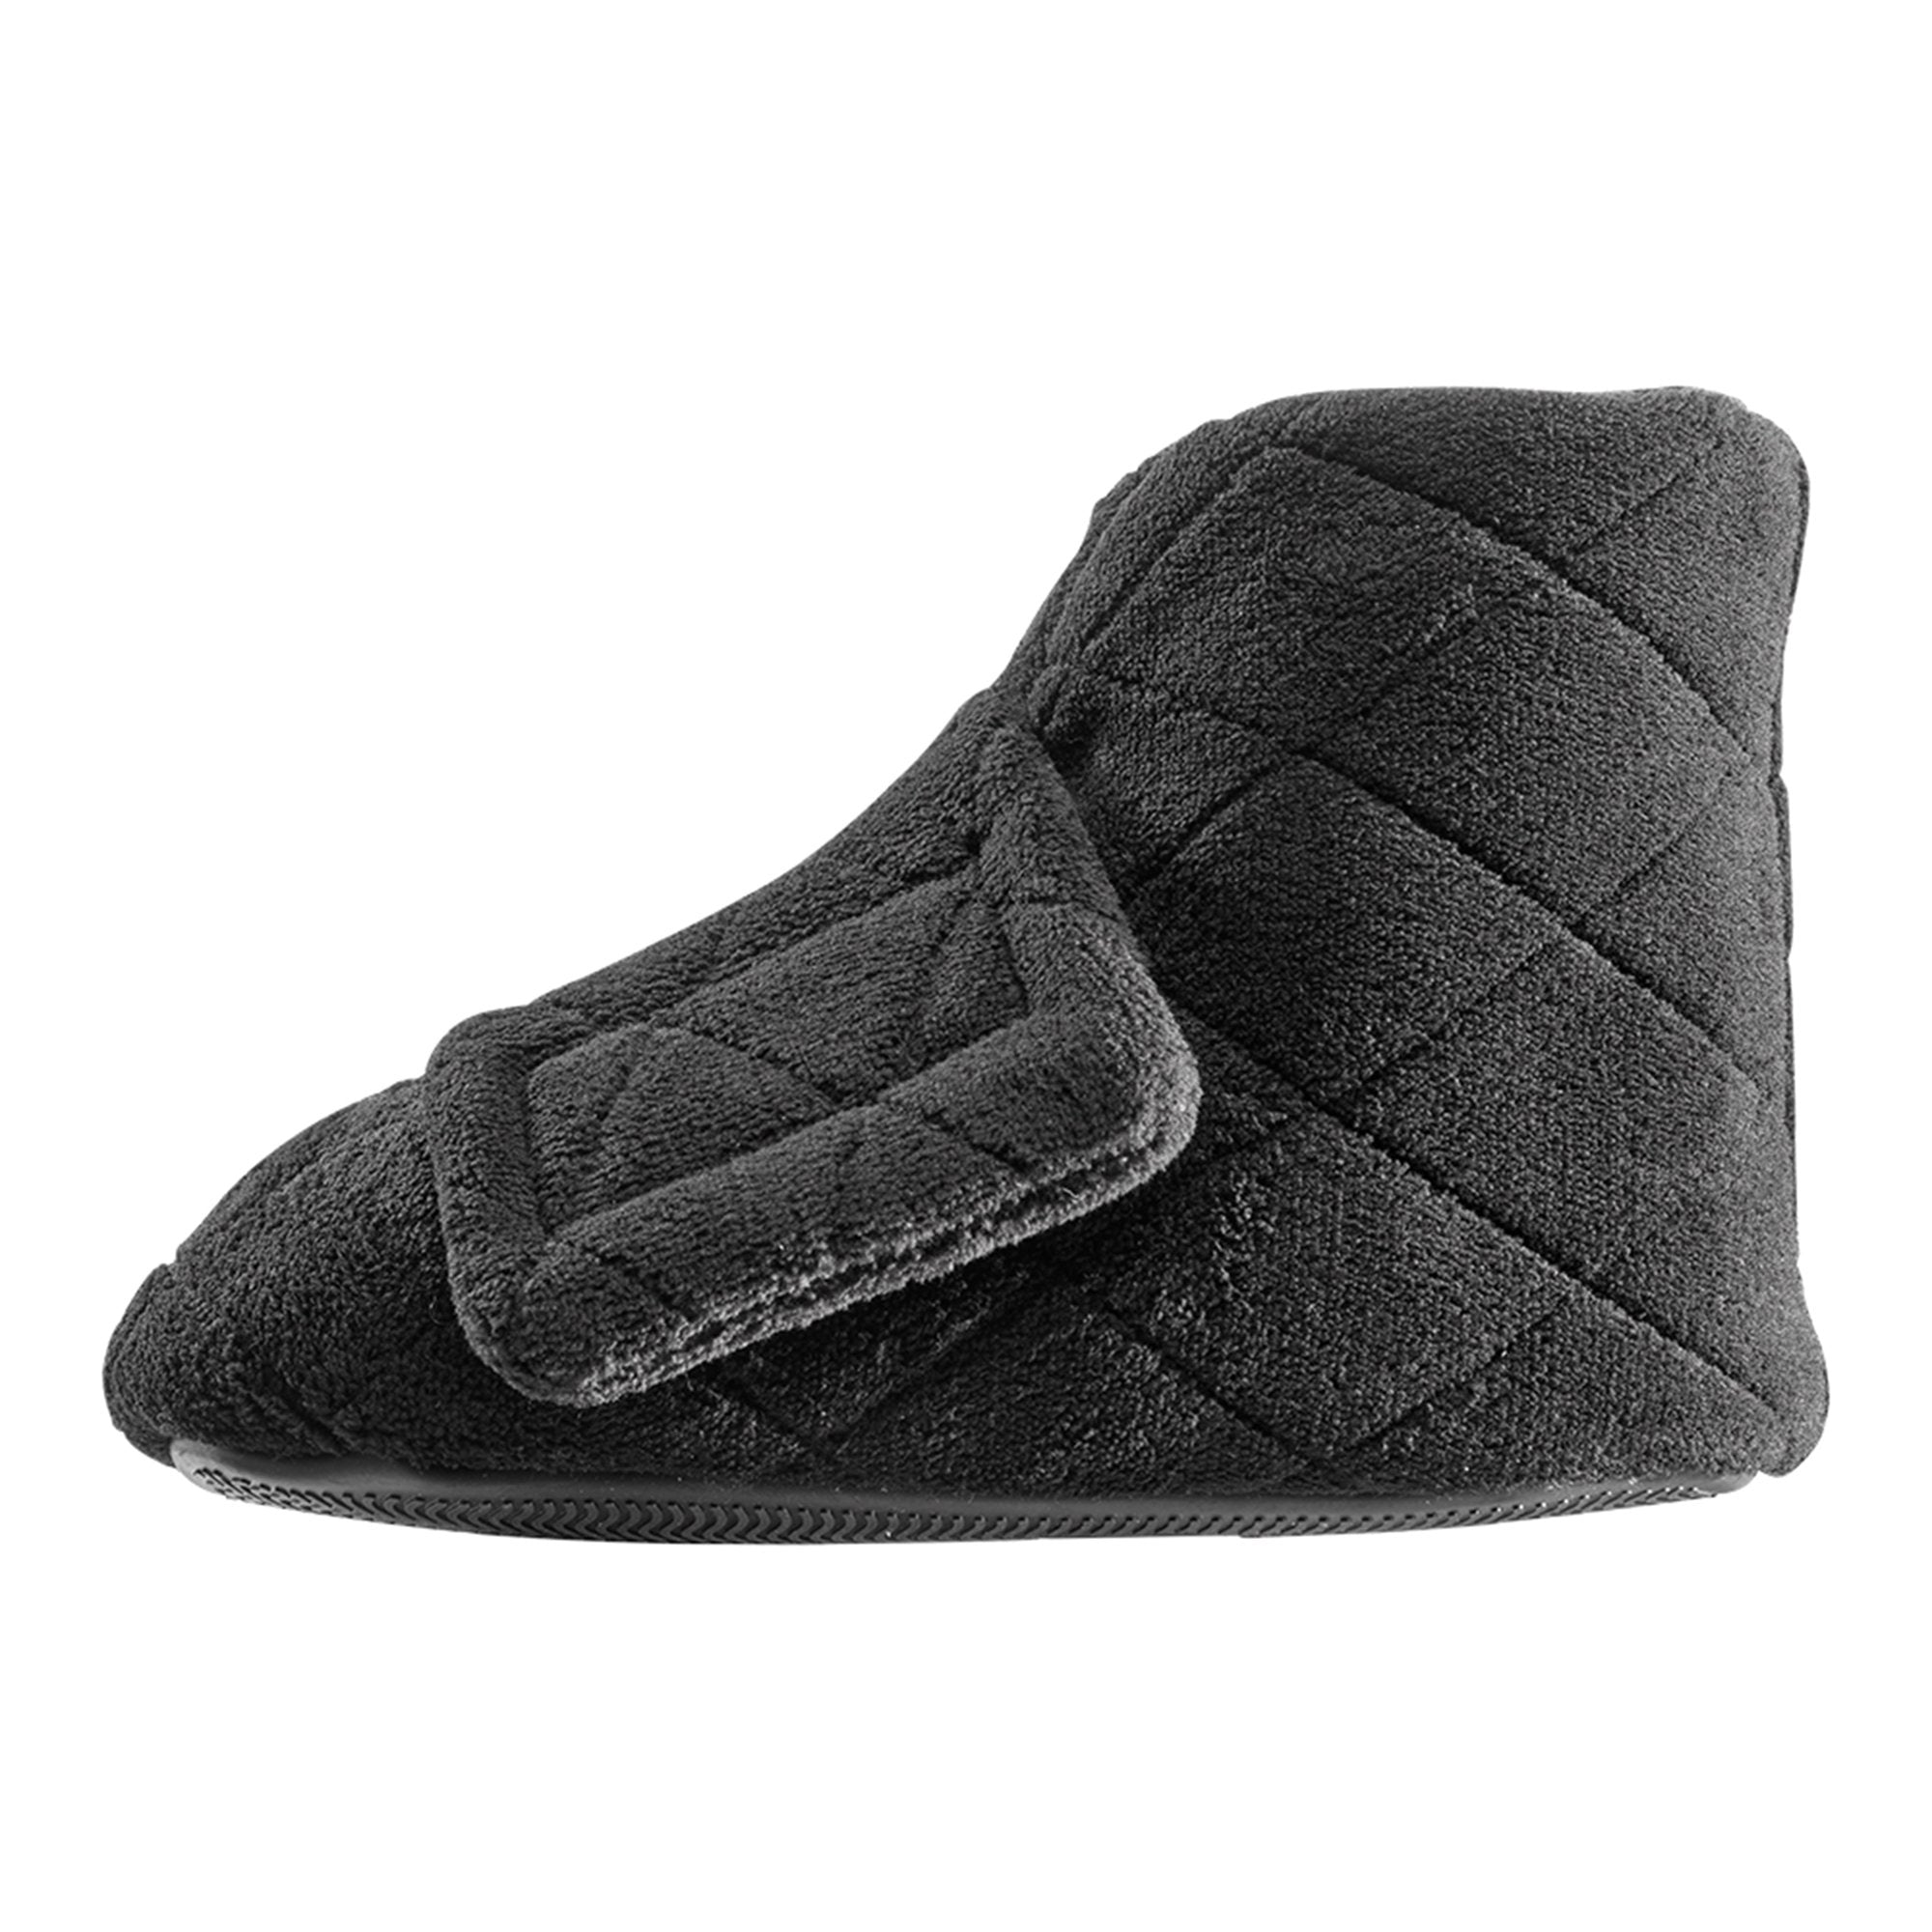 Bootie Slippers Silverts® X-Large / X-Wide Black Ankle High